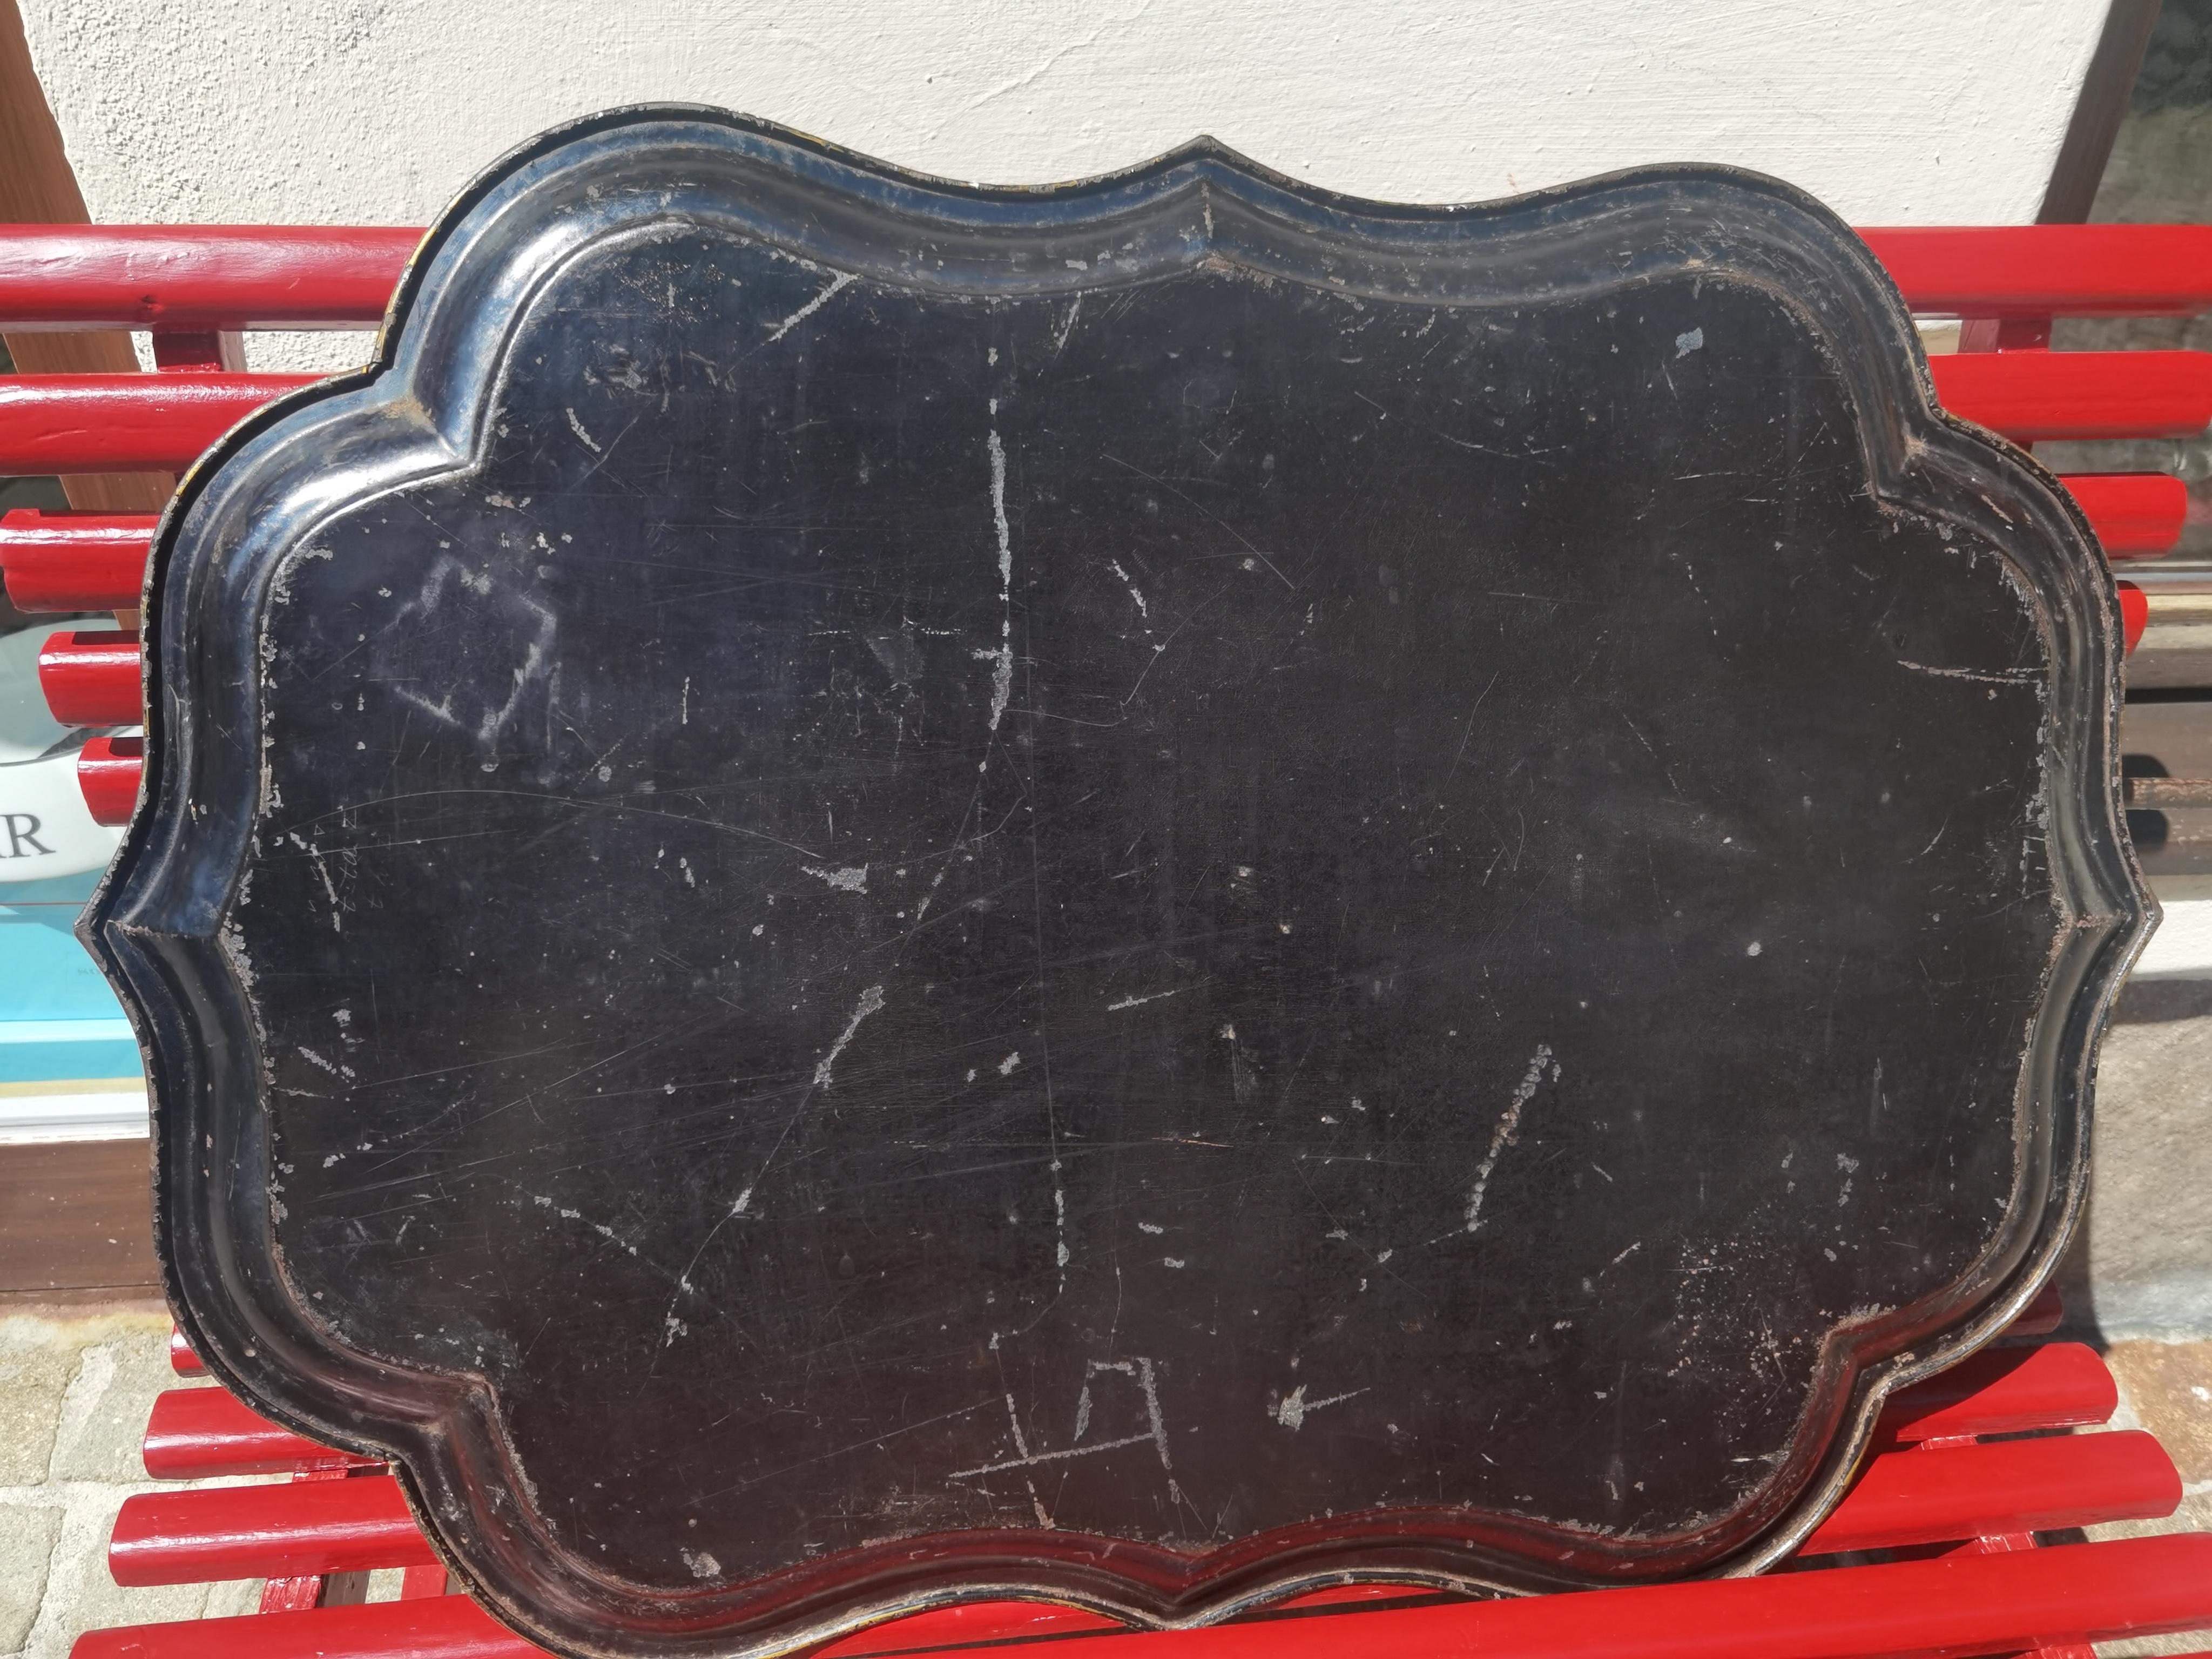 Large 19th century georgian serving tray in metal. Rectangular form with scalloped edges and gilt line framed. Hand-painted floral sprays on a black ground.